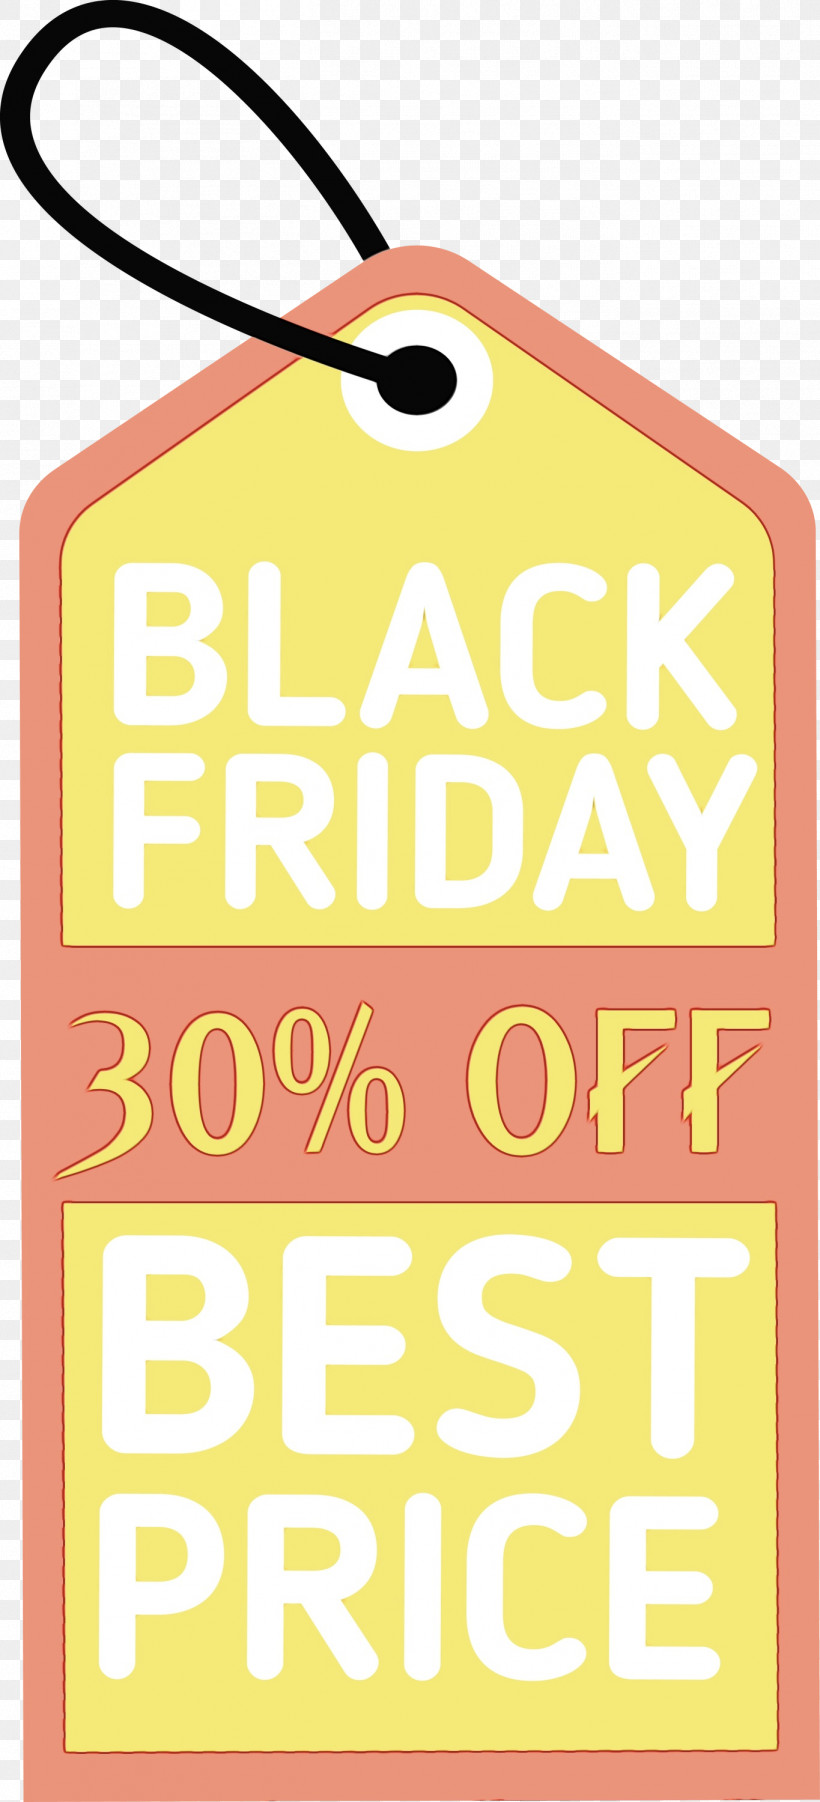 Logo Yellow Line Area Happiness, PNG, 1365x3000px, Black Friday Sale, Area, Black Friday, Black Friday Discount, Happiness Download Free